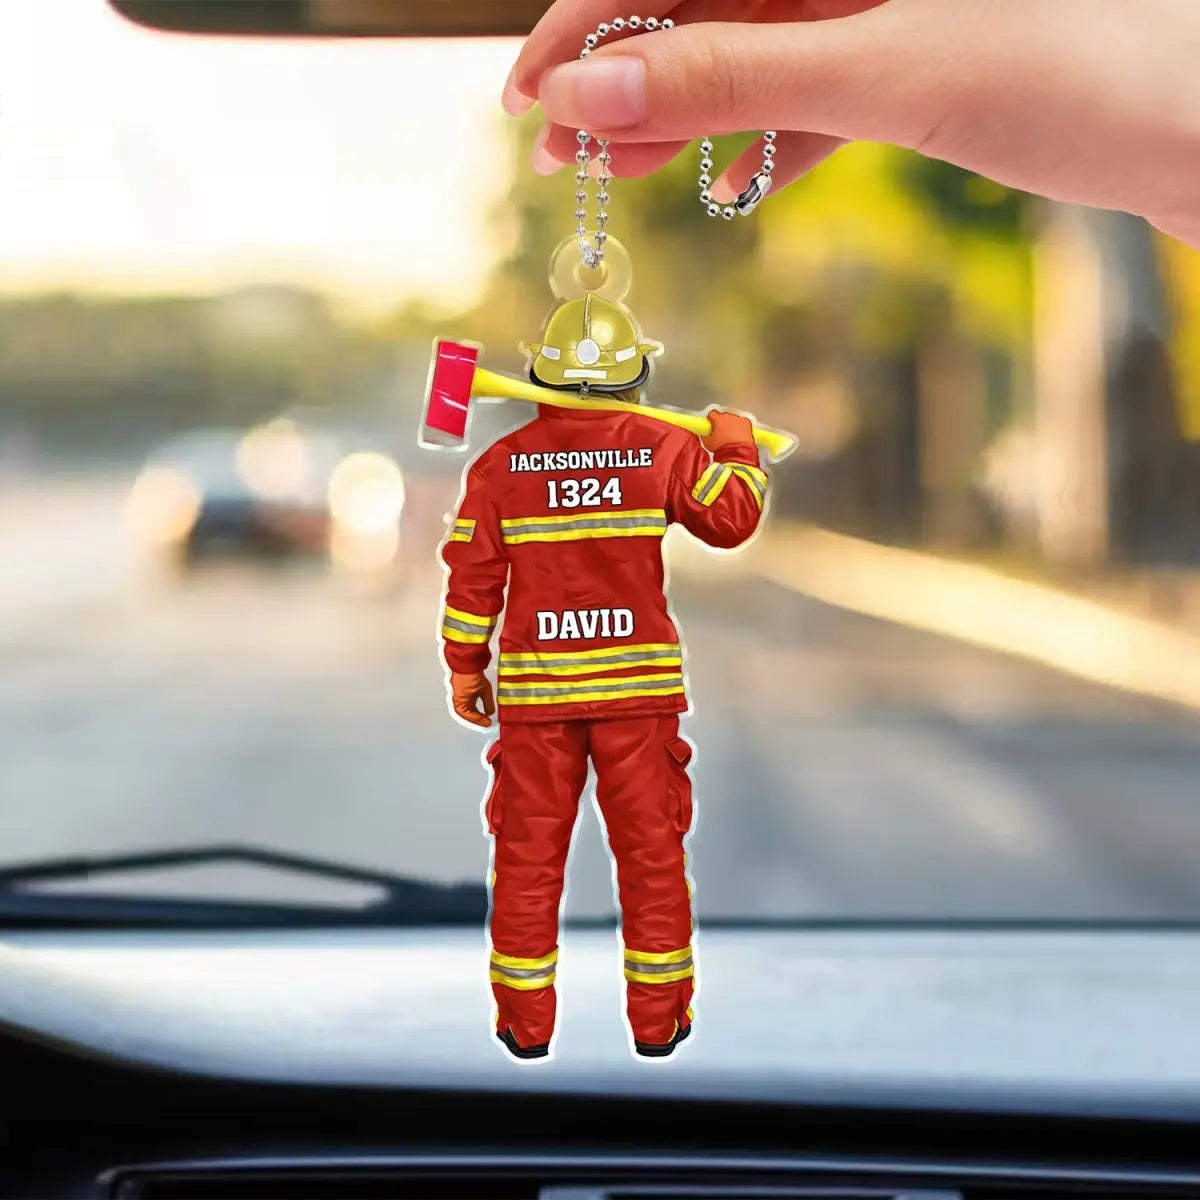 Firefighter - Firefighter Uniform - Personalized Acrylic Car Hanger